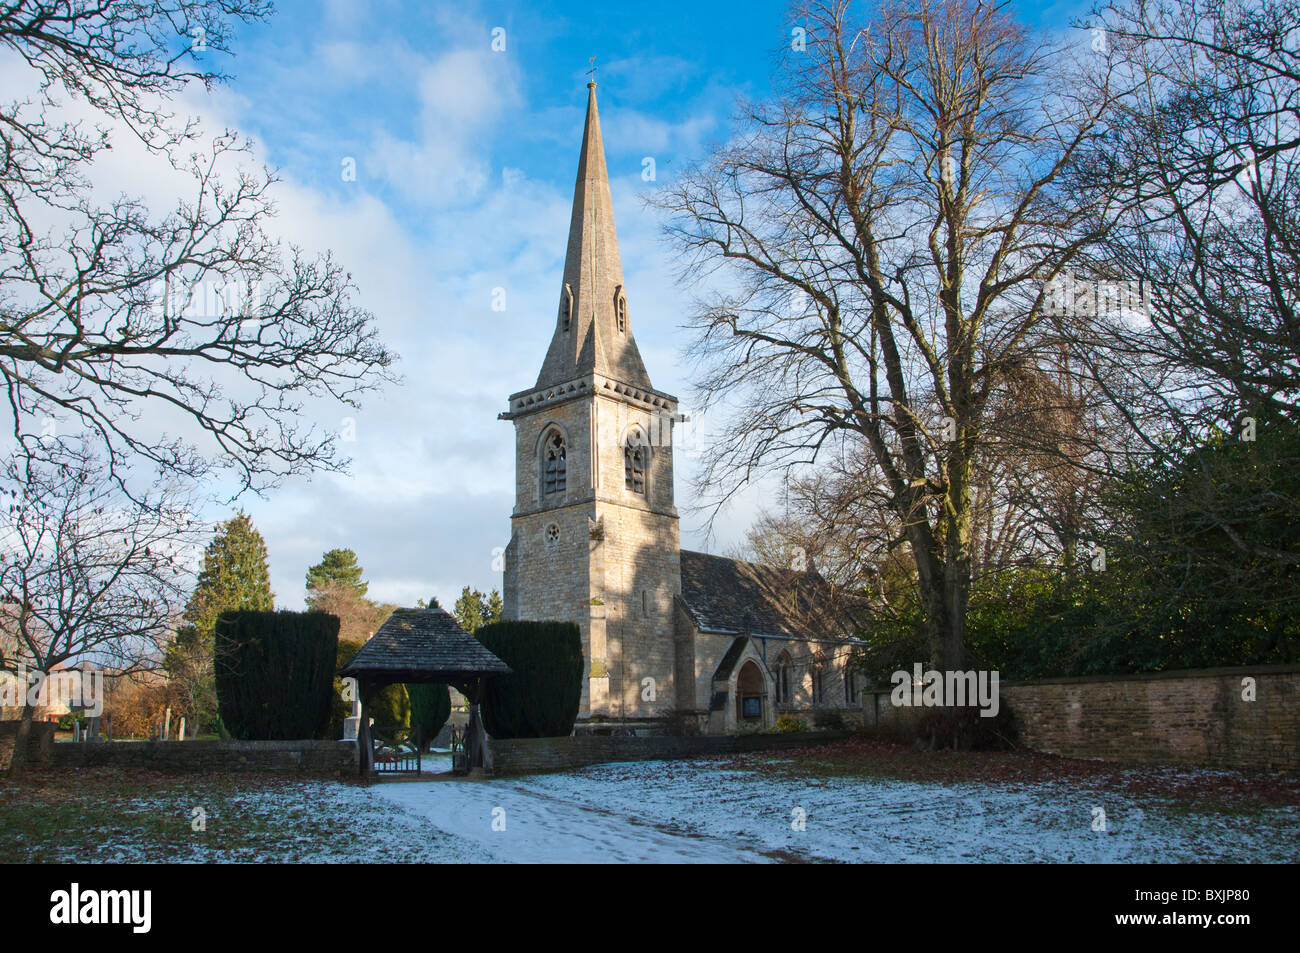 St. Mary's Church, lower Slaughter, Gloucestershire, England in snow. Stock Photo